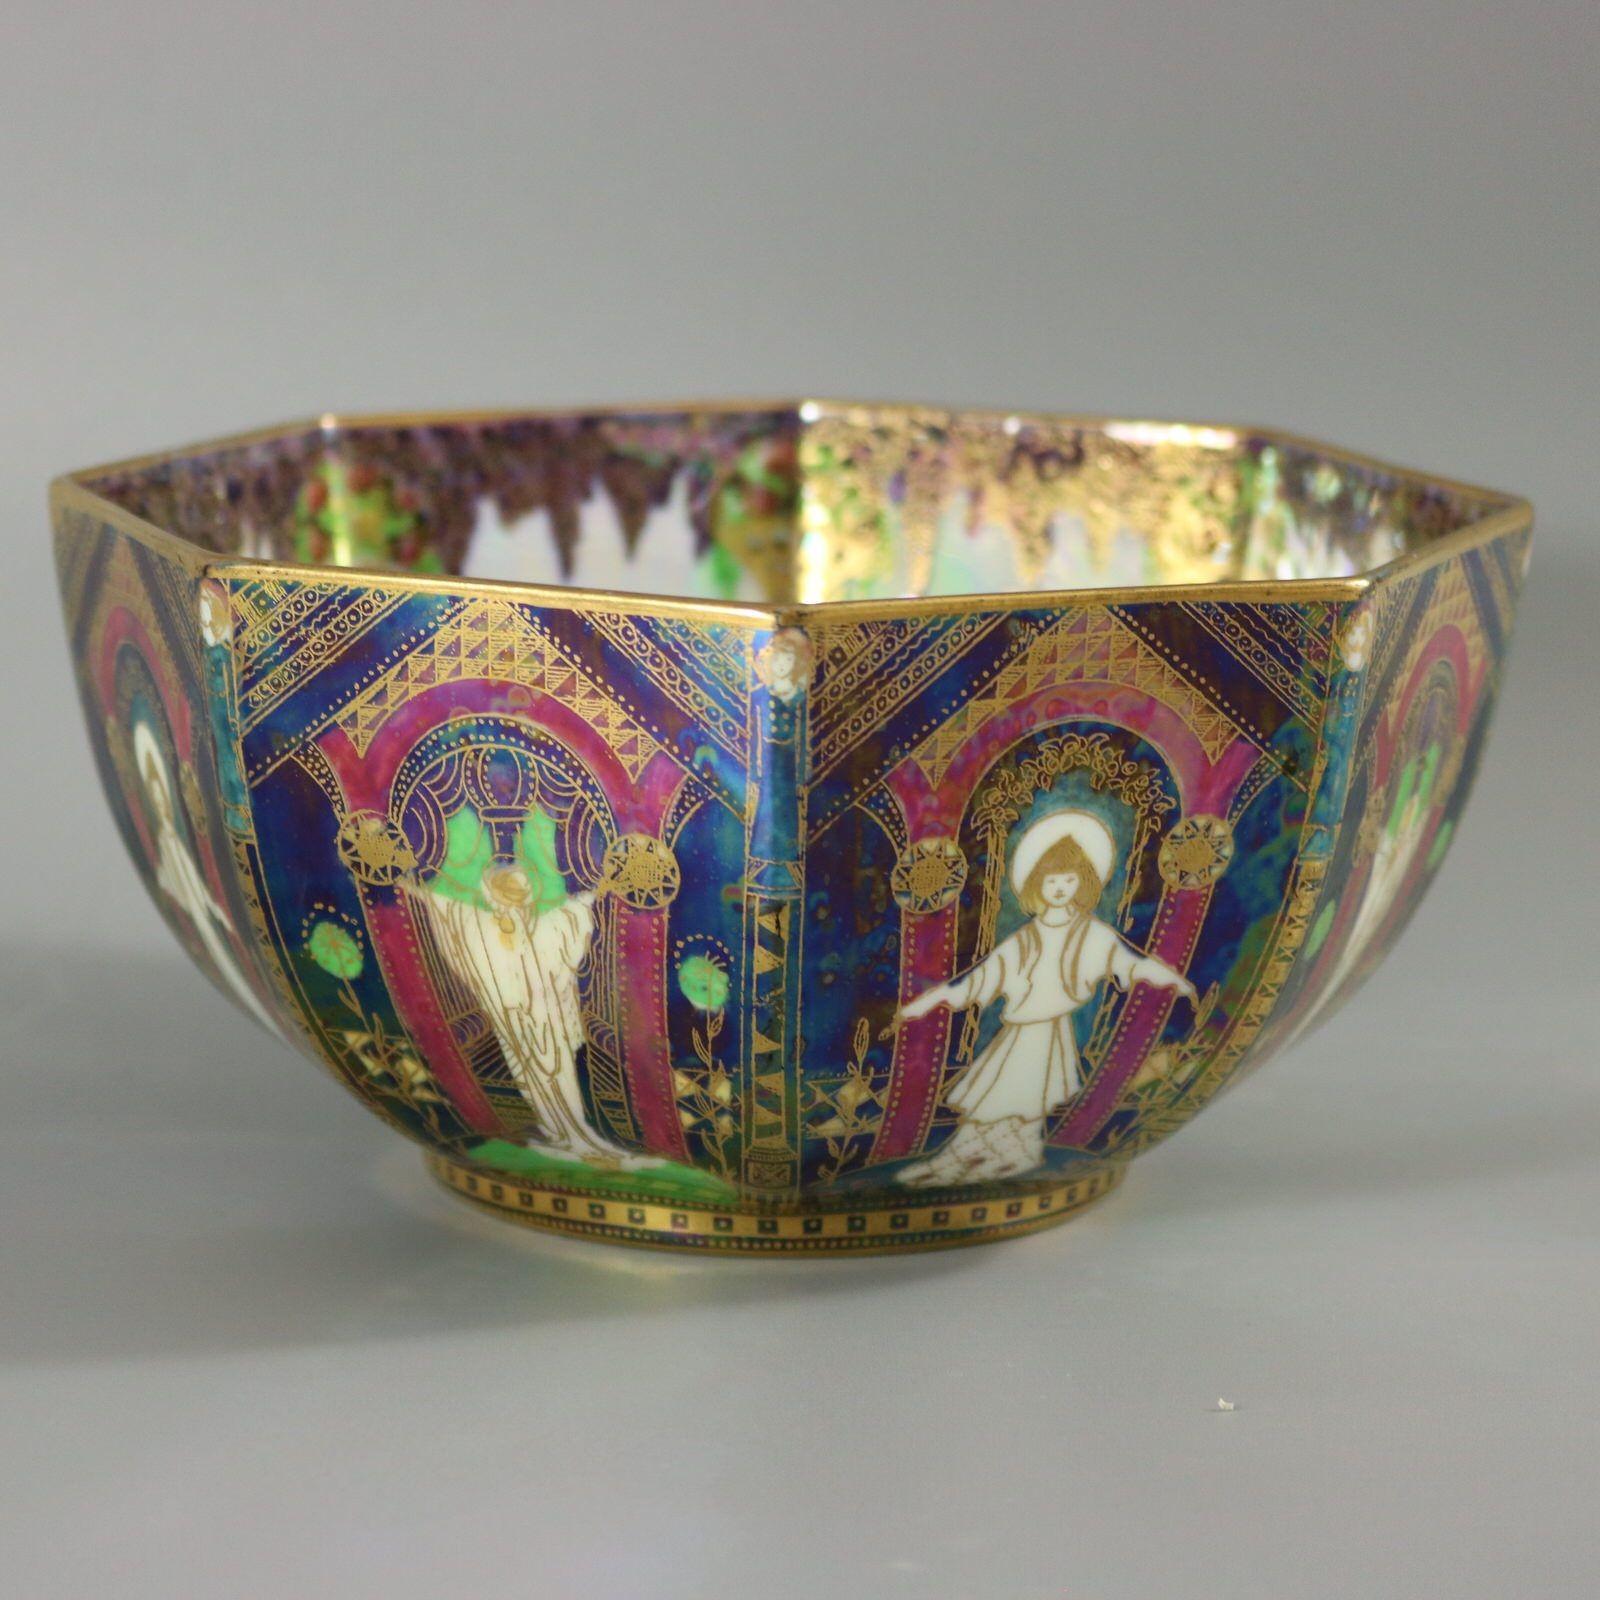 Wedgwood Fairyland Lustre octagonal bowl, decorated with 'Geisha' or 'Angels' design to the exterior. 'Running Figures' pattern to the interior. The foot rim decorated with 'Roseberry bead'. Wedgwood 'Portland Vase' and 'WEDGWOOD MADE IN ENGLAND'